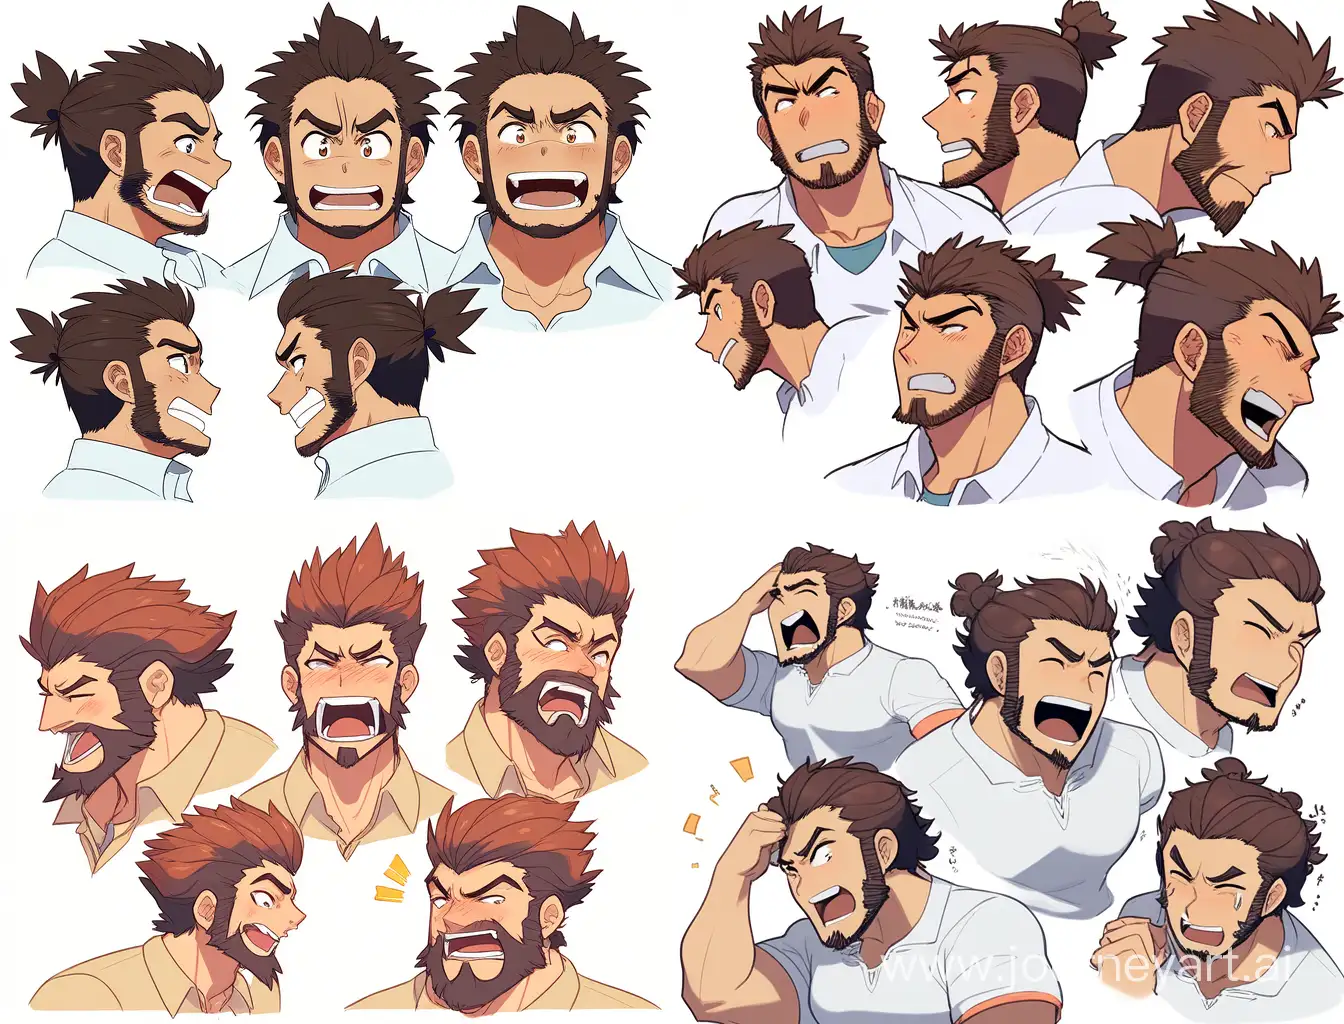 Expressive-Cartoon-Character-with-Medium-Height-and-Dynamic-Hair-Emotions